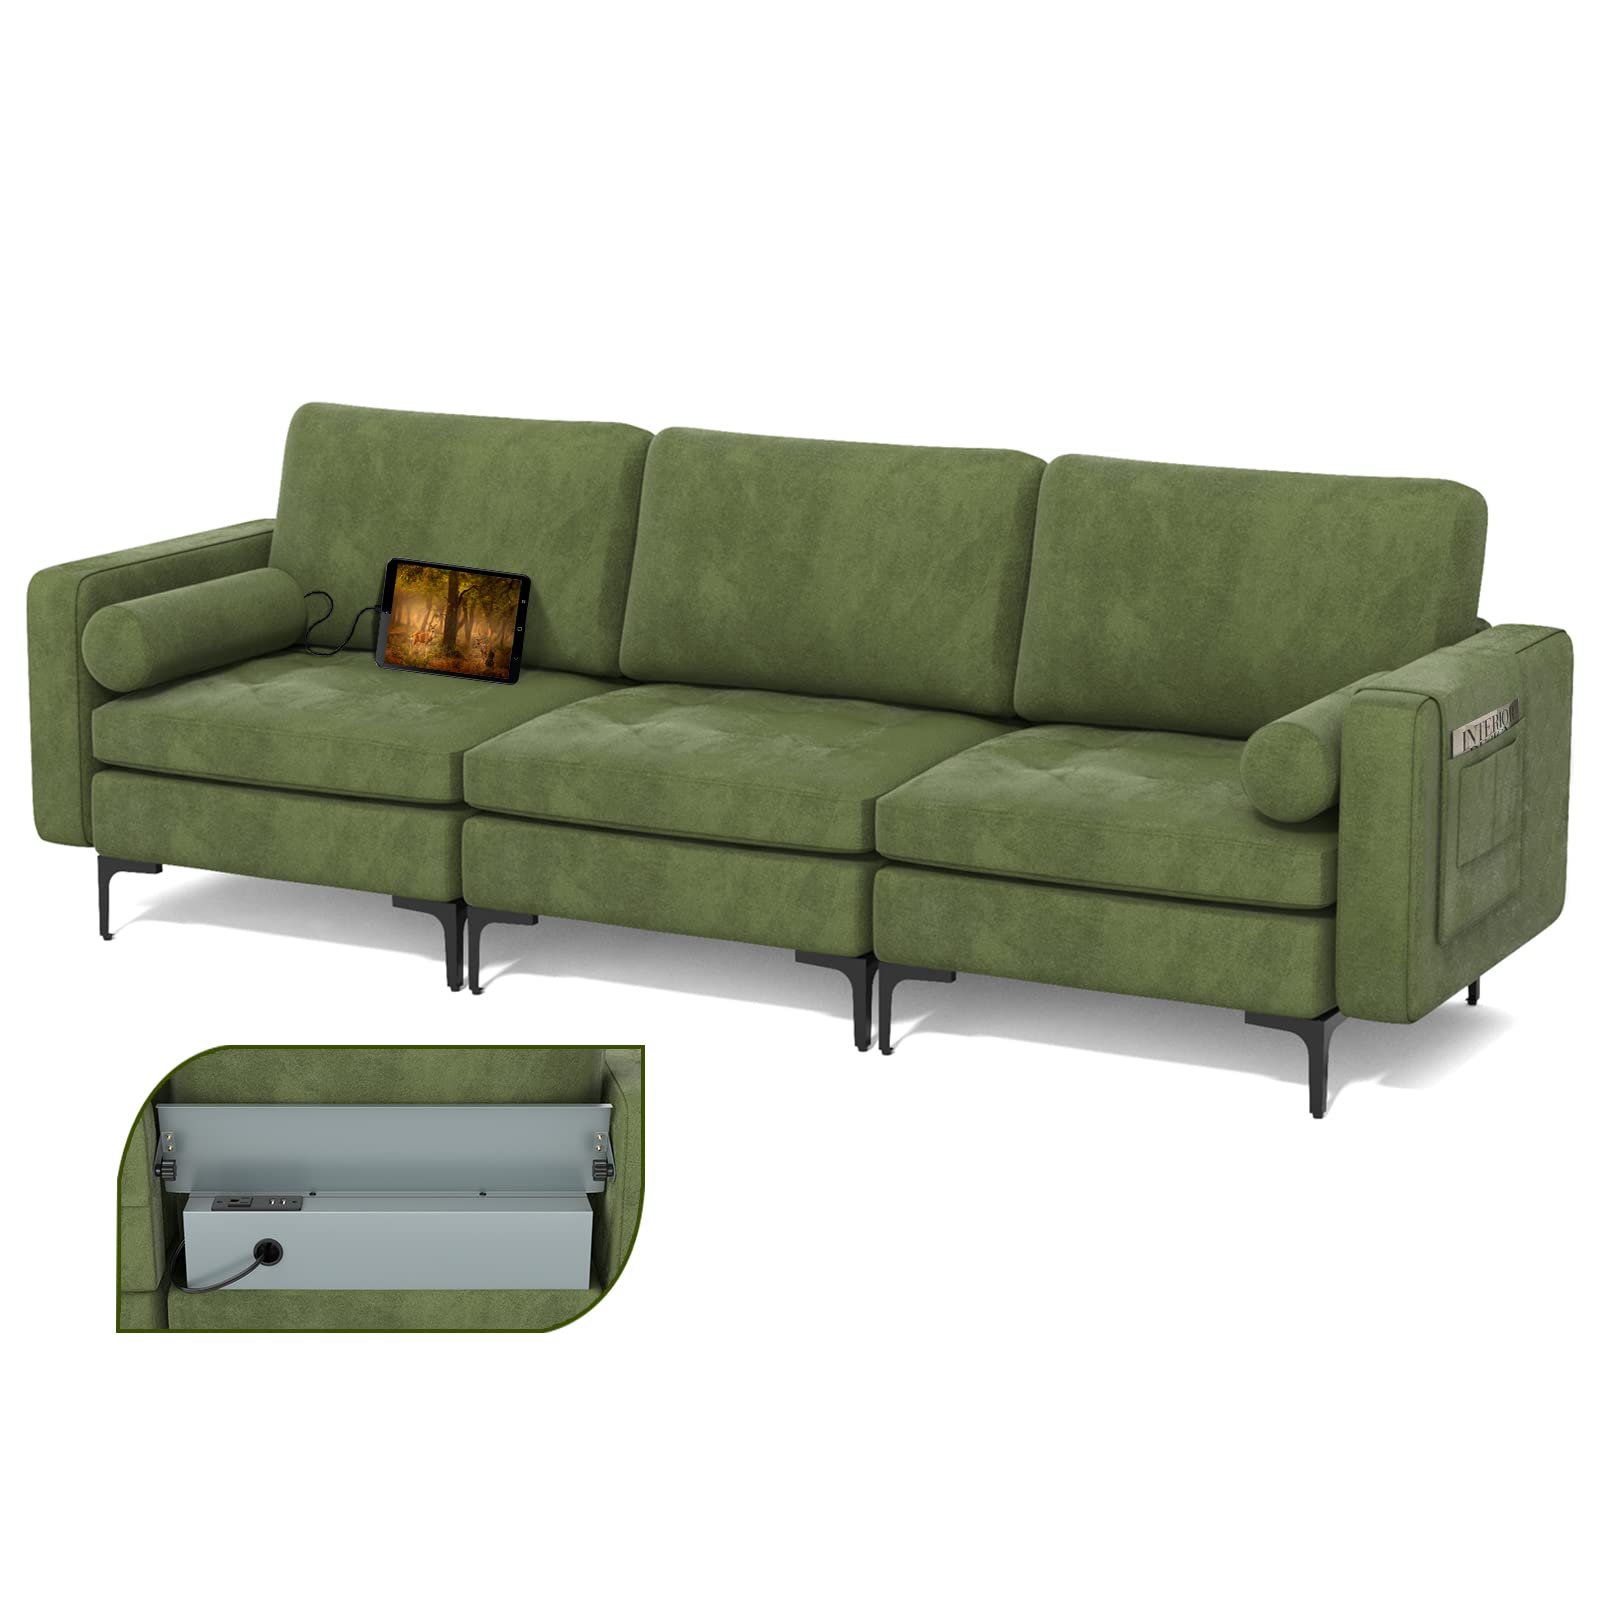 Giantex 97" Sectional Sofa Couch, 3-Seater Modular Sleeper with USB Ports